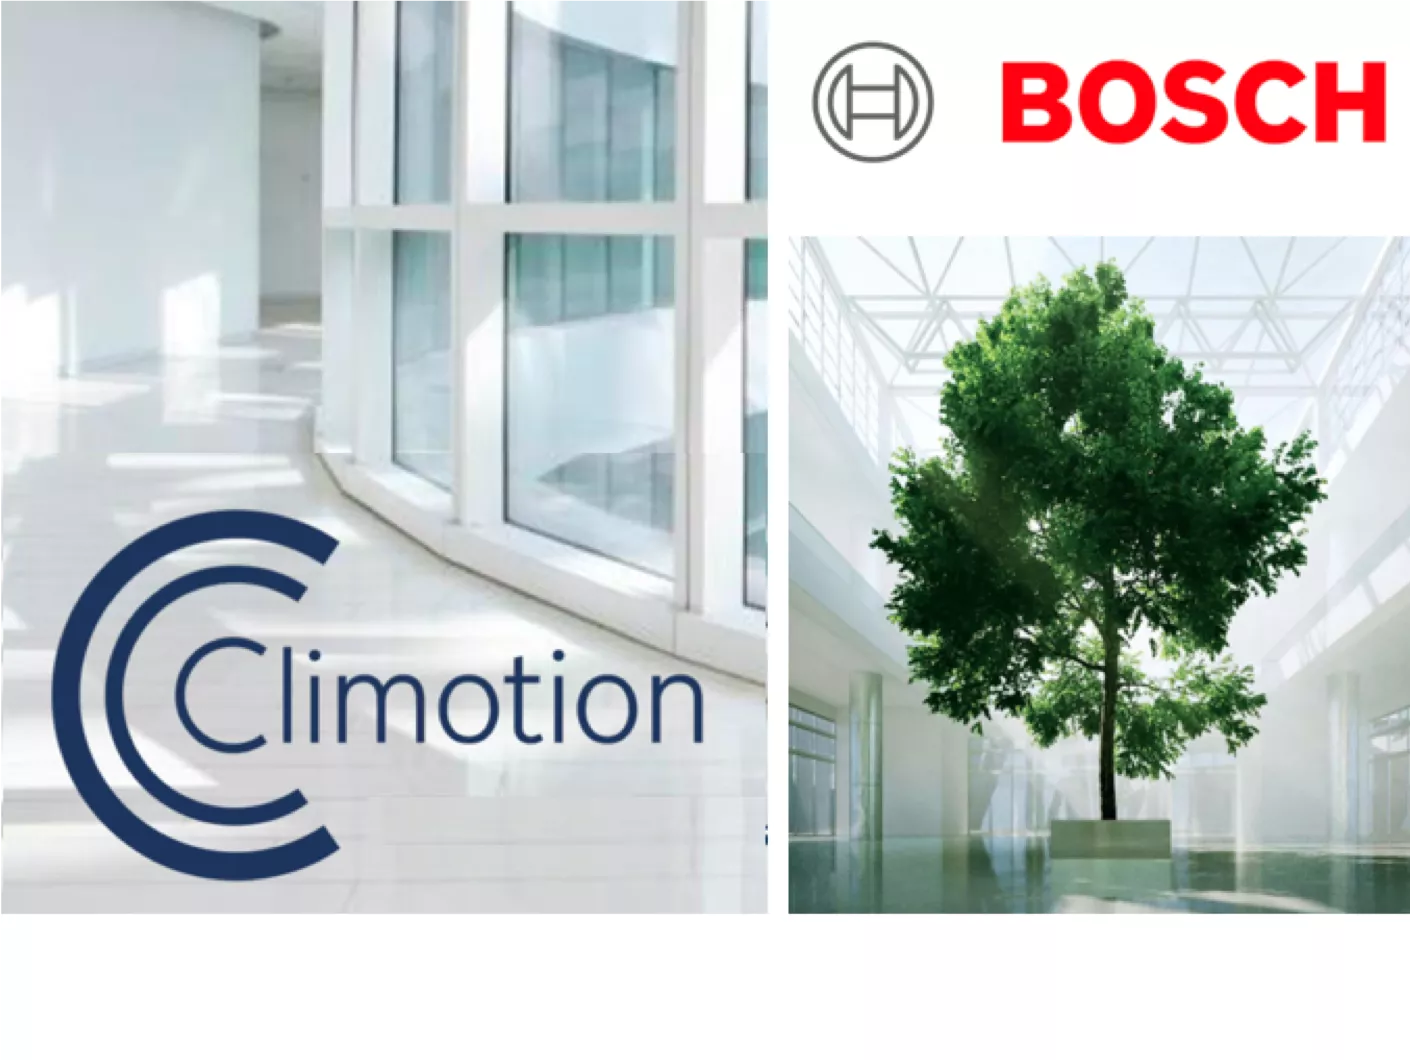 Climotion Bosch1